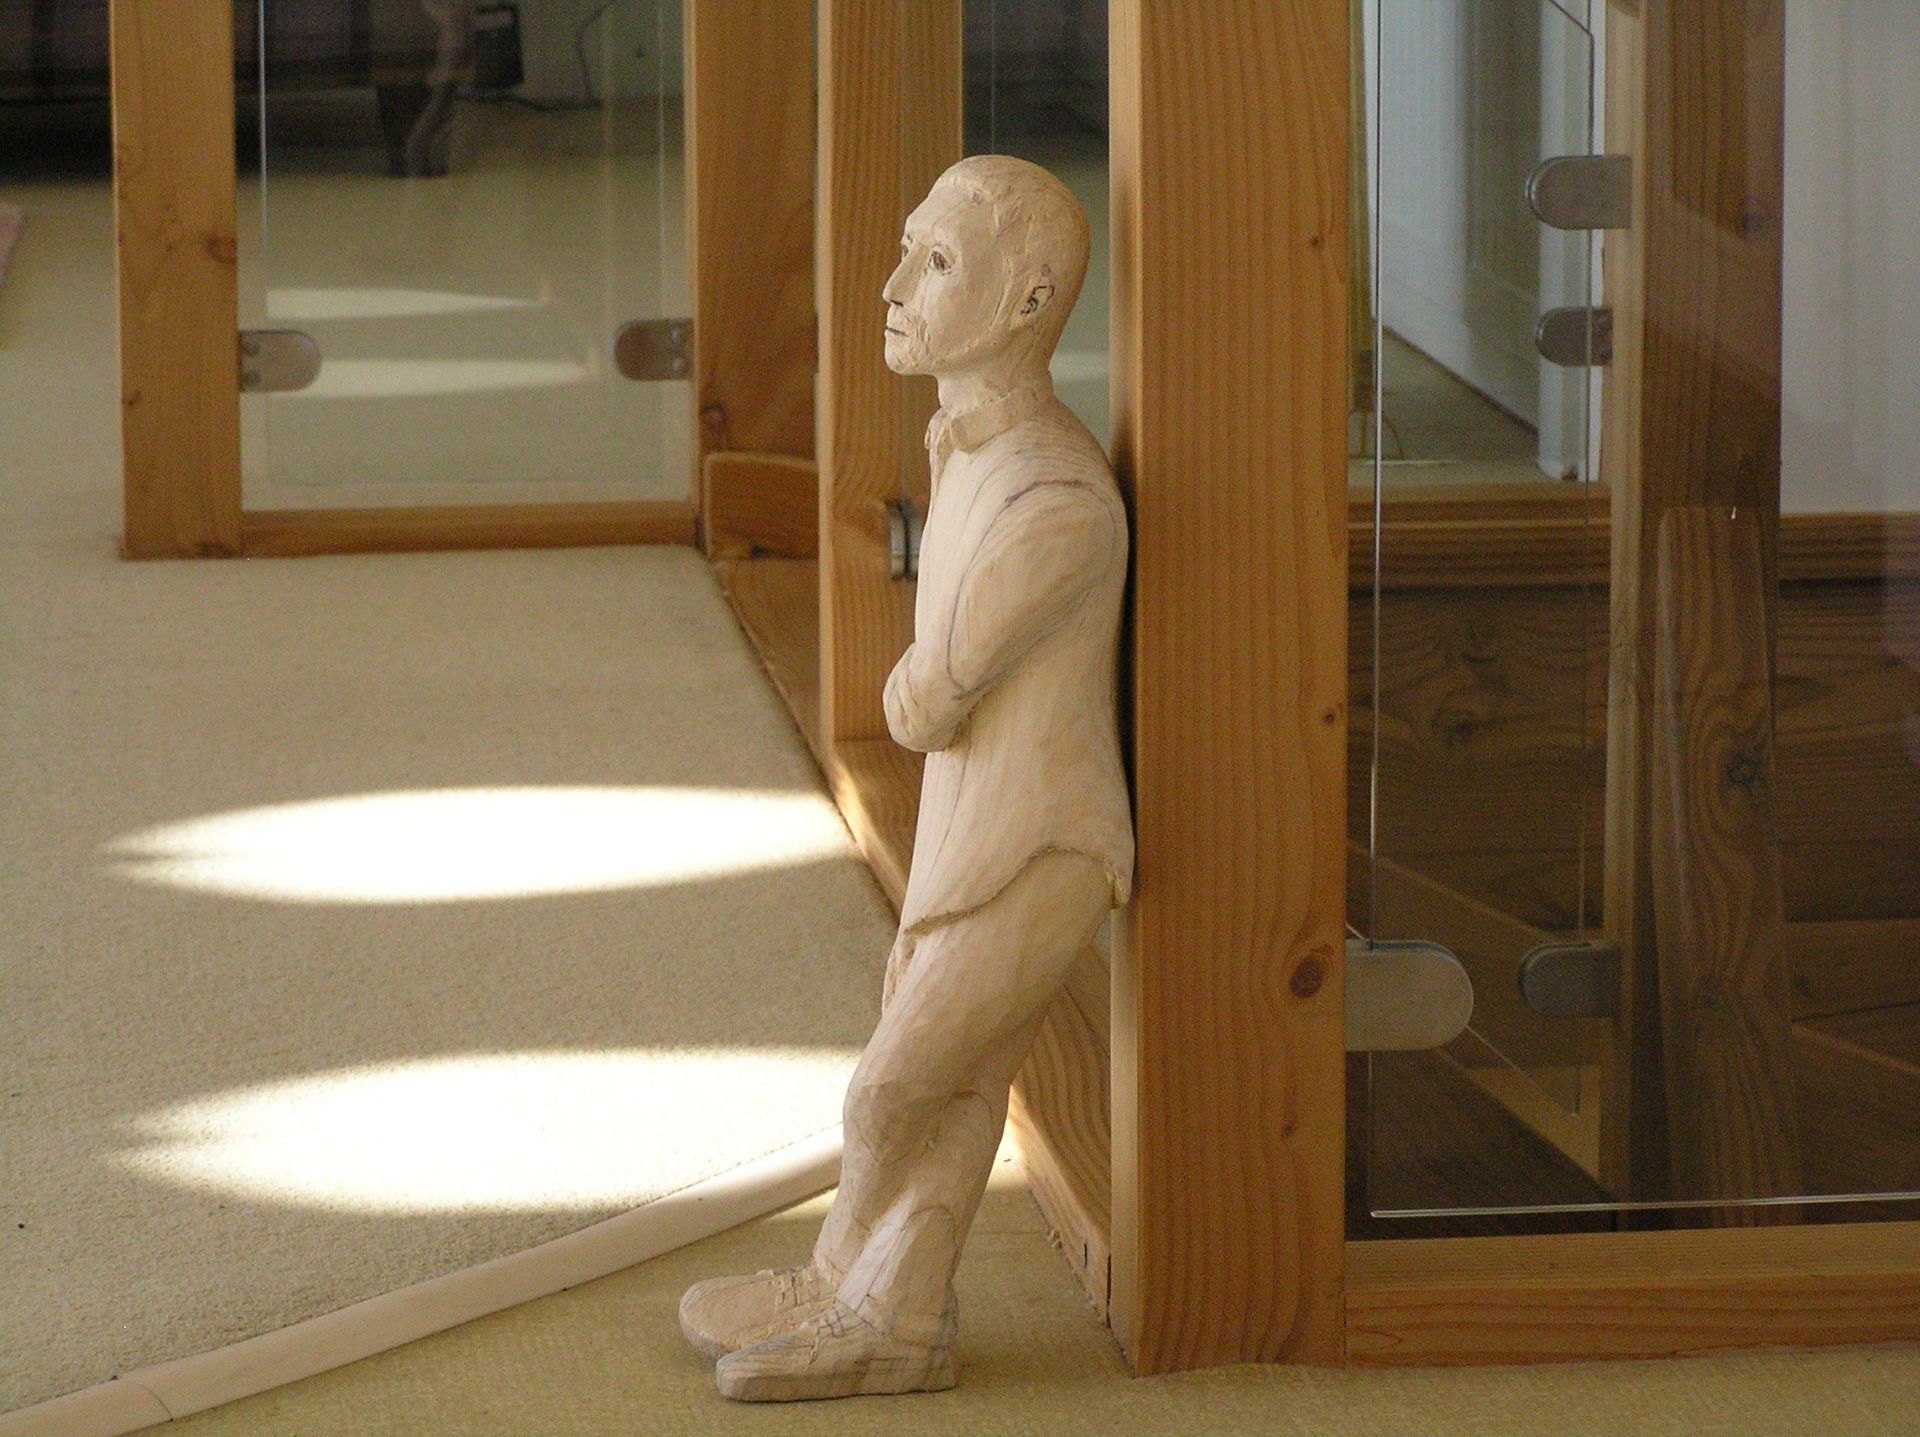 Small scale figurative sculpture by Ingrained Culture